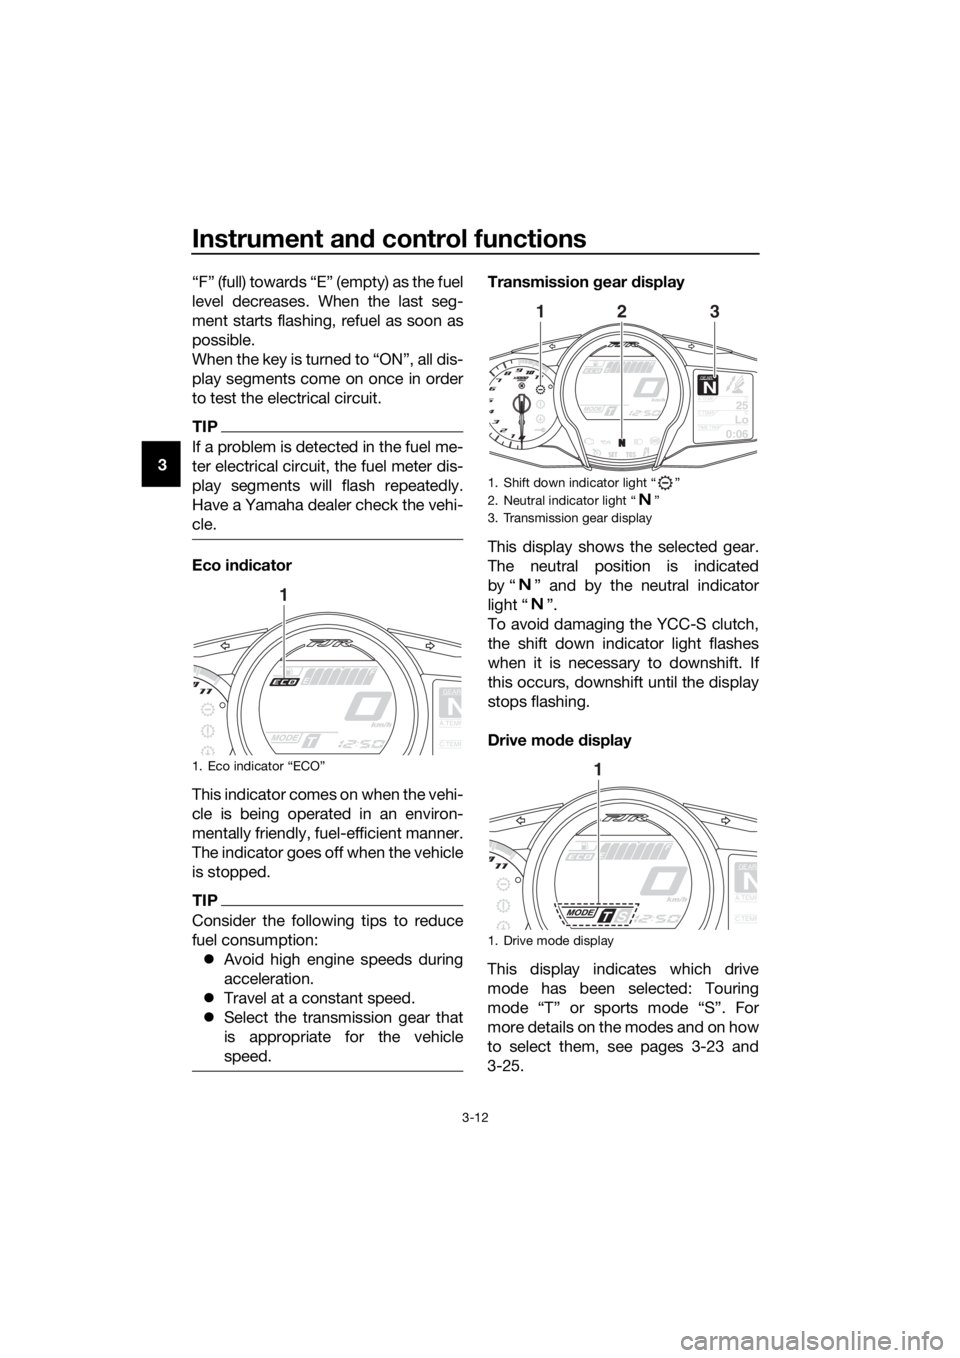 YAMAHA FJR1300AS 2018 Owners Manual Instrument and control functions
3-12
3 “F” (full) towards “E” (empty) as the fuel
level decreases. When the last seg-
ment starts flashing, refuel as soon as
possible.
When the key is turned 